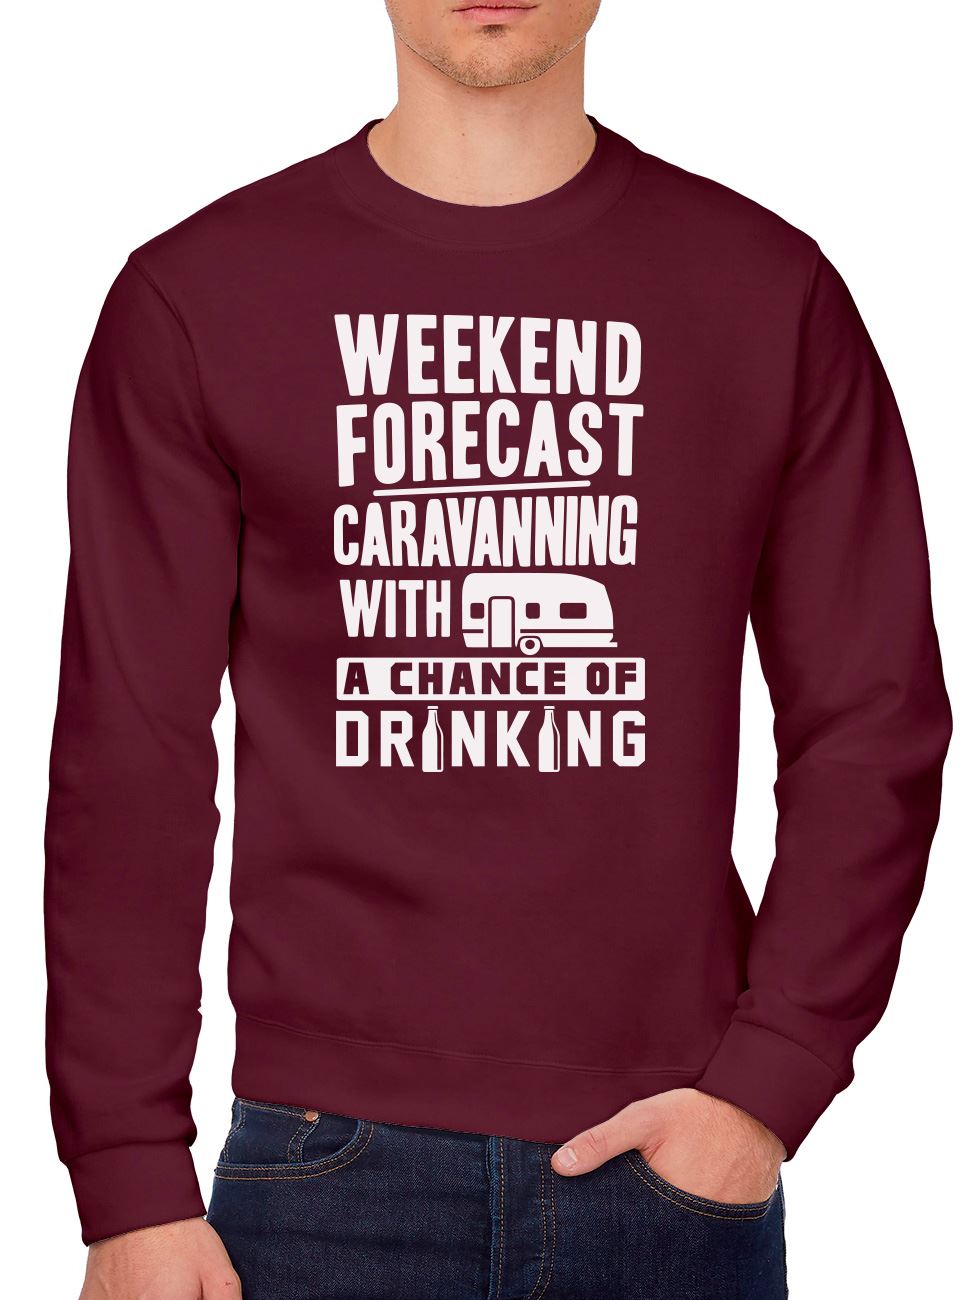 Weekend Forecast Caravanning with a Chance of Drinking - Mens Sweatshirt